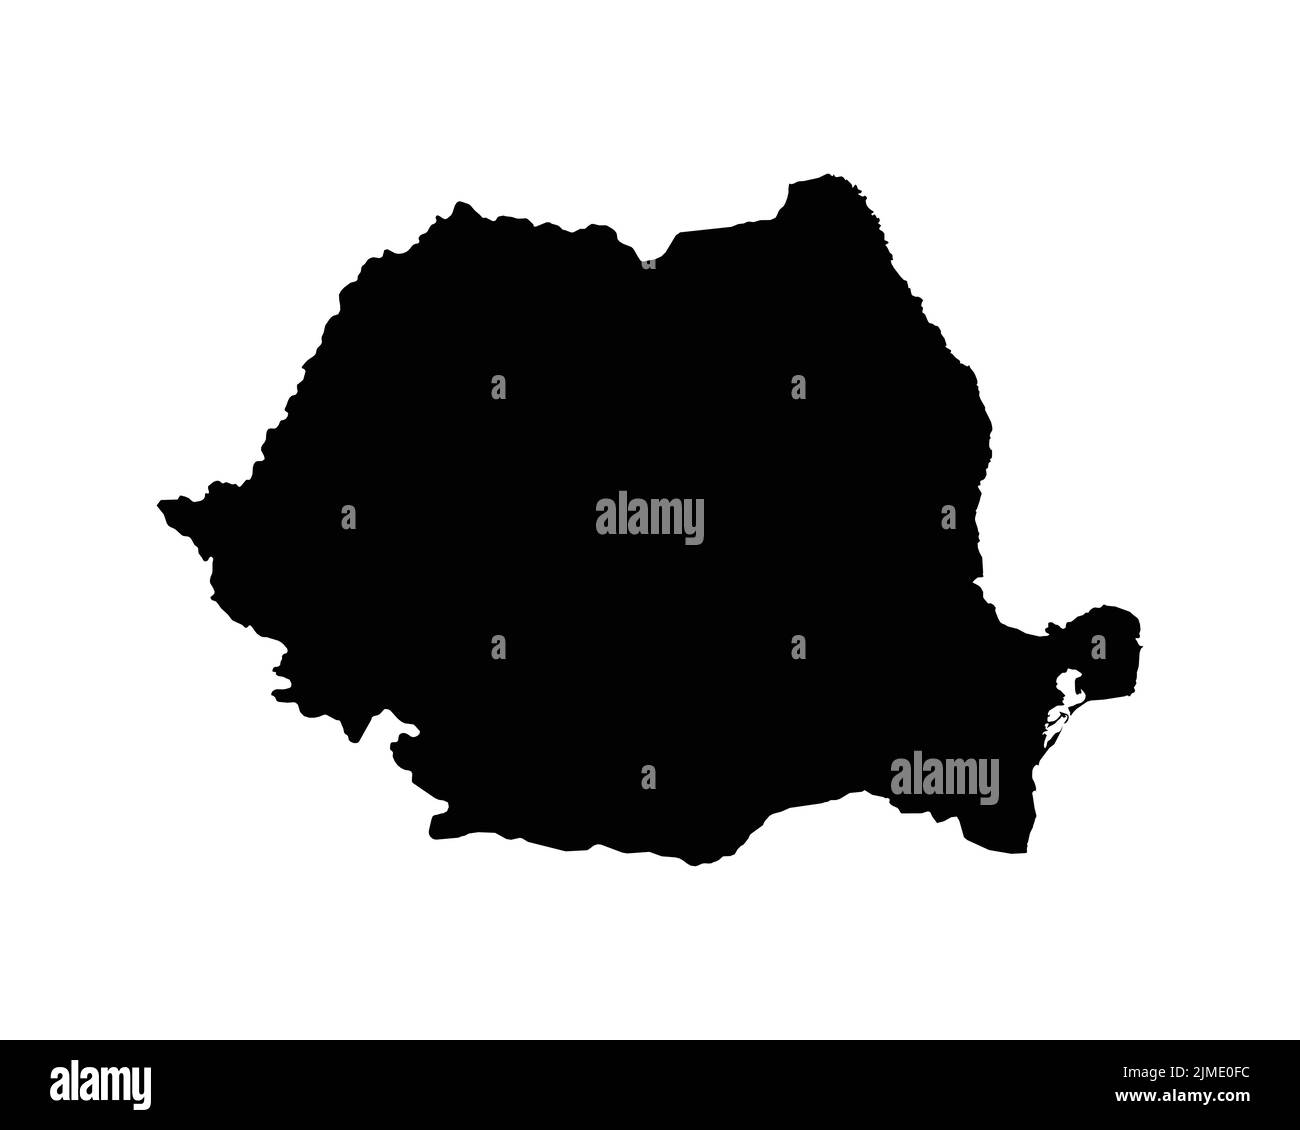 Romania Map. Romanian Country Map. Black and White National Nation Geography Outline Border Boundary Territory Shape Vector Illustration EPS Clipart Stock Vector